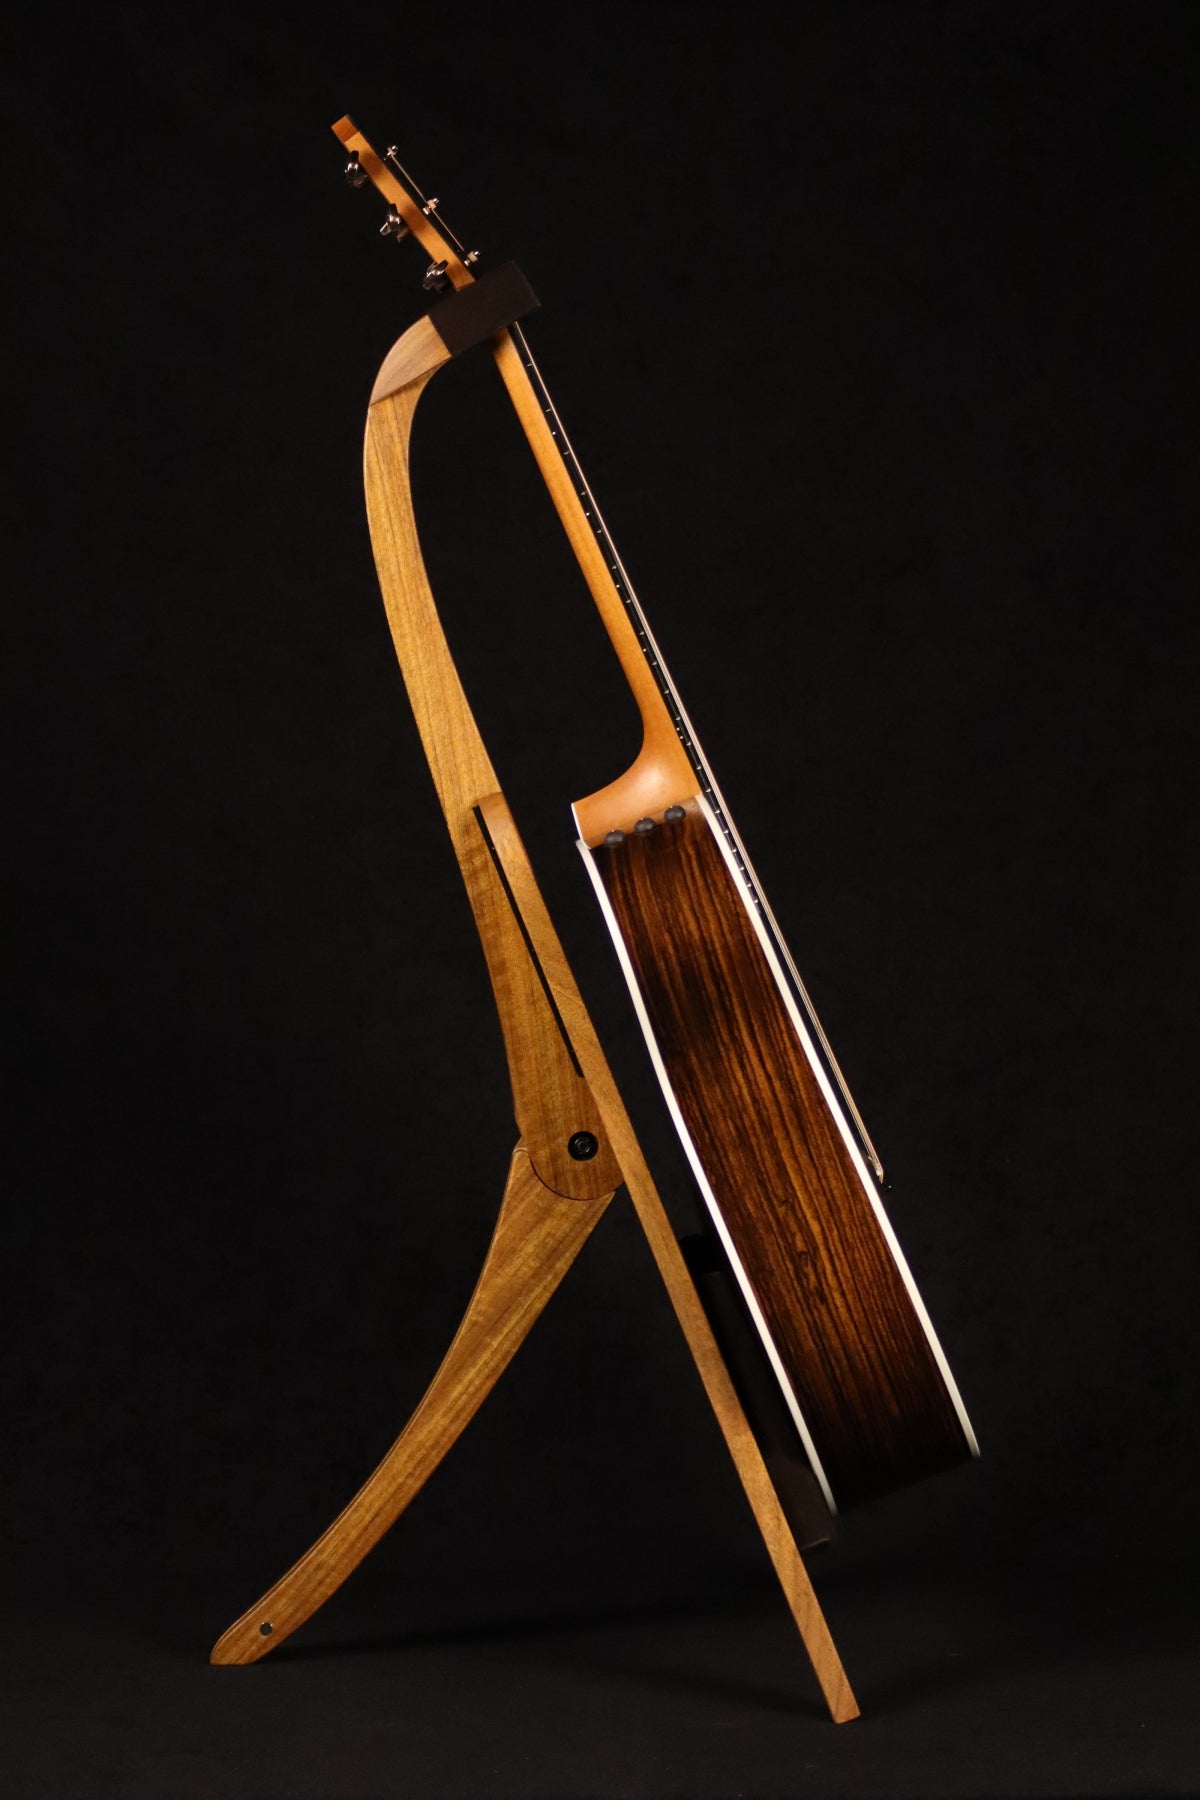 Folding sheuda ovangkol and curly maple wood guitar stand full side image with Taylor guitar